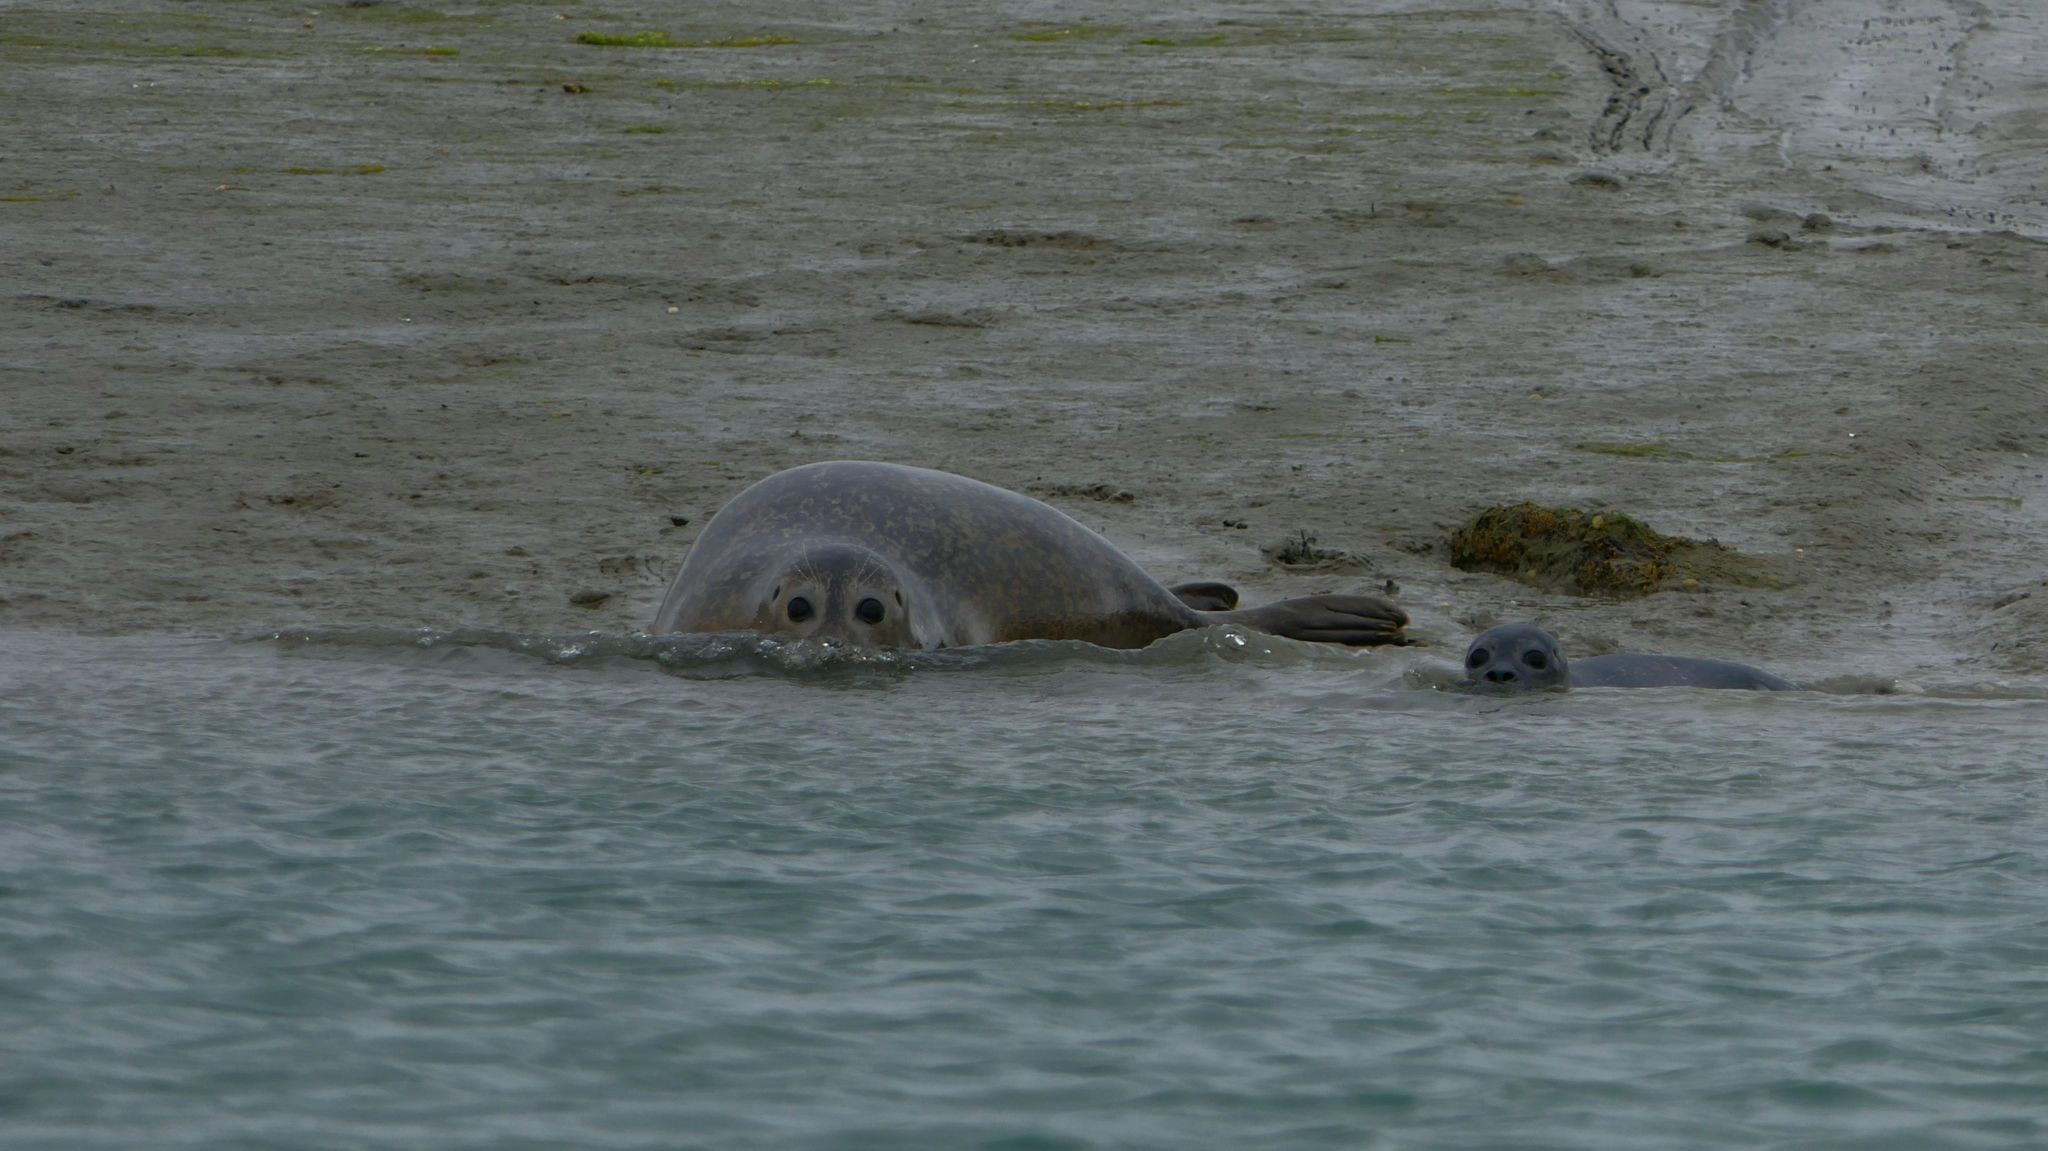 TUESDAY - A seal and a baby seal lie half on the beach and half in the water on an overcast day. The seals are a grey colour and the bank is muddy. The sea in the foreground appears blue.